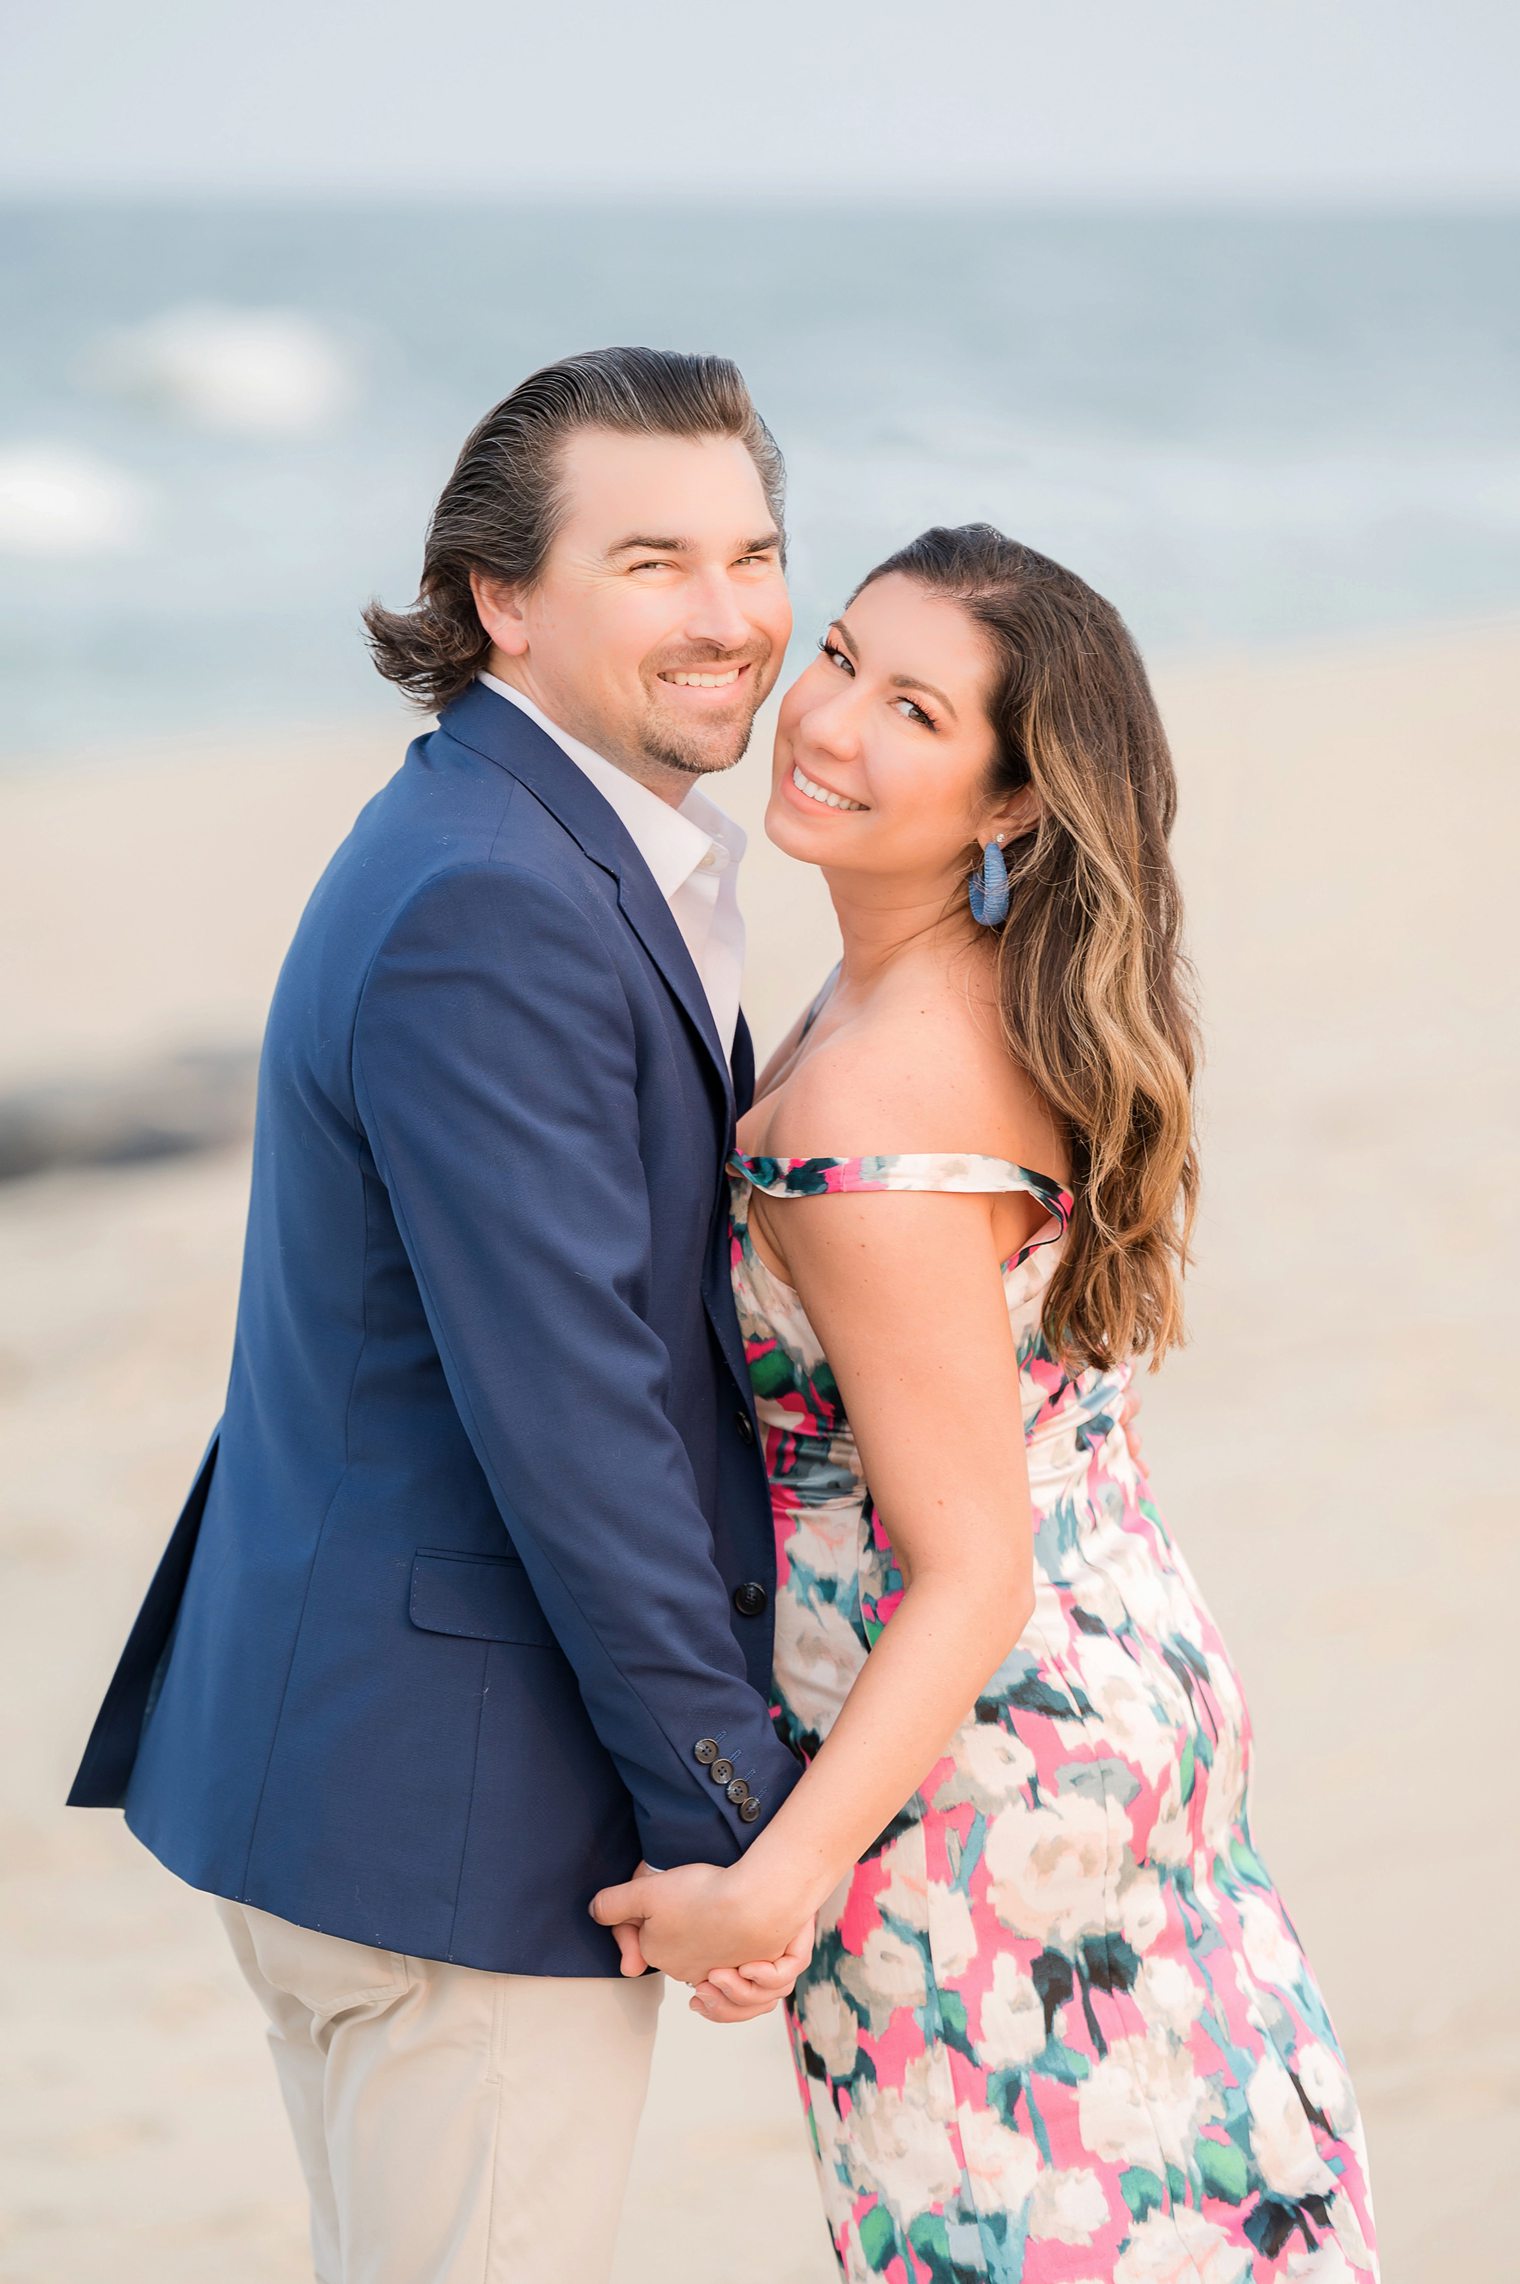 Future Husband and Wife happy at their beach engagement session